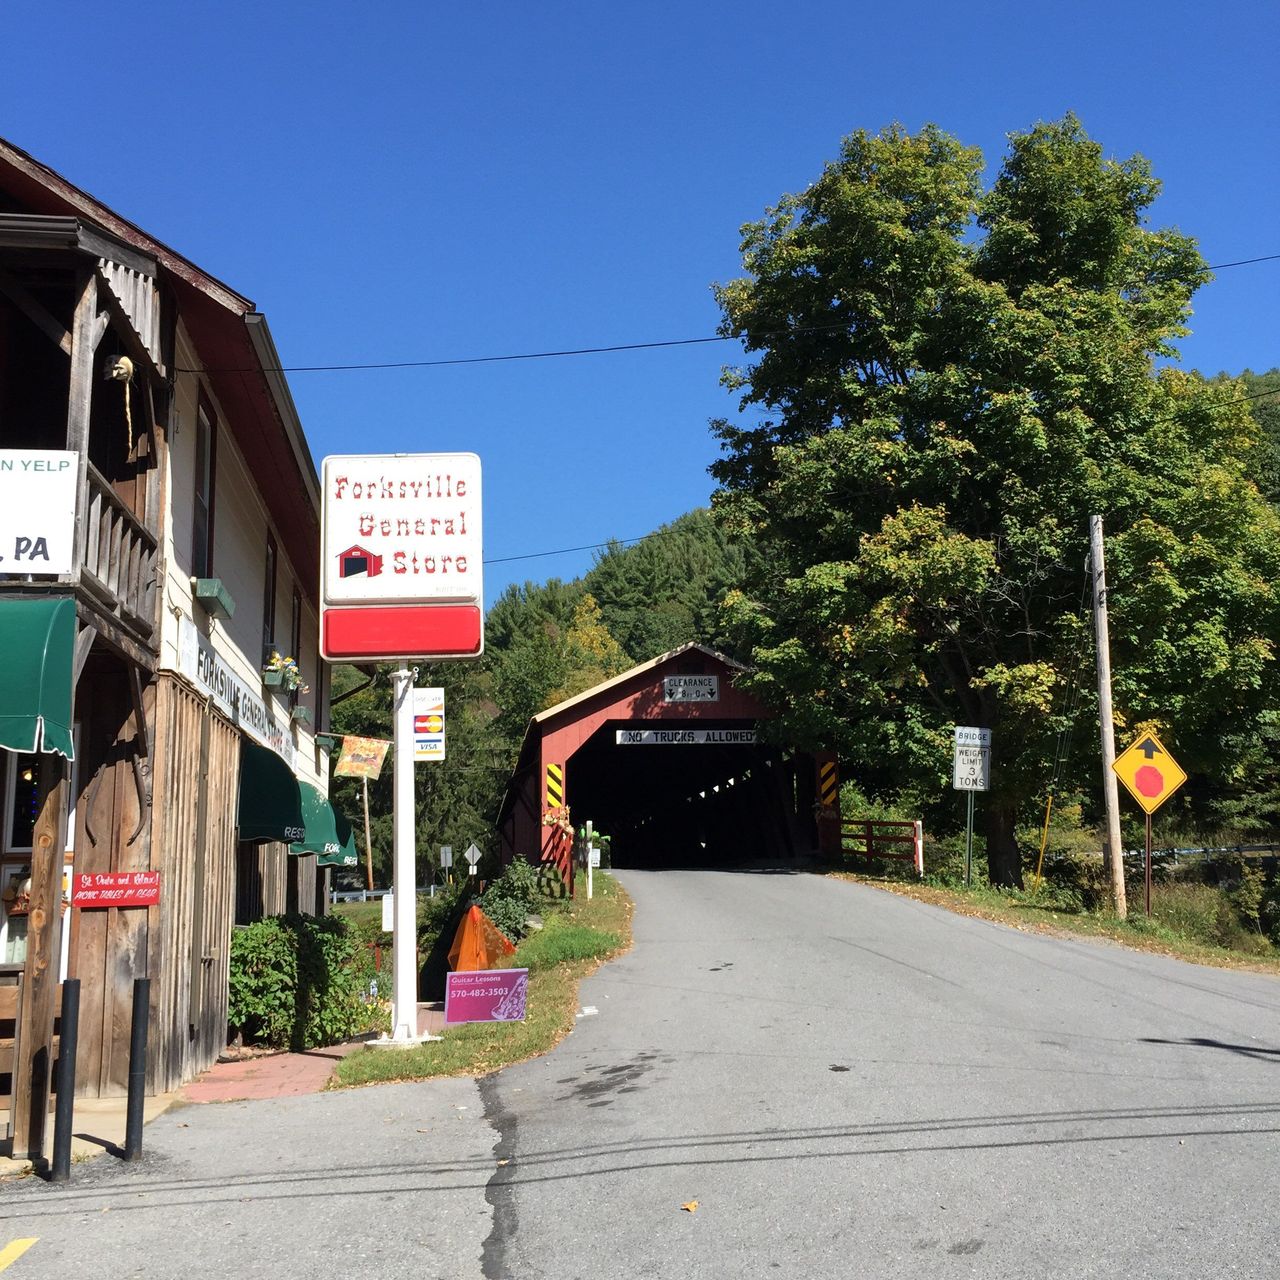 Forksville General Store and covered bridge